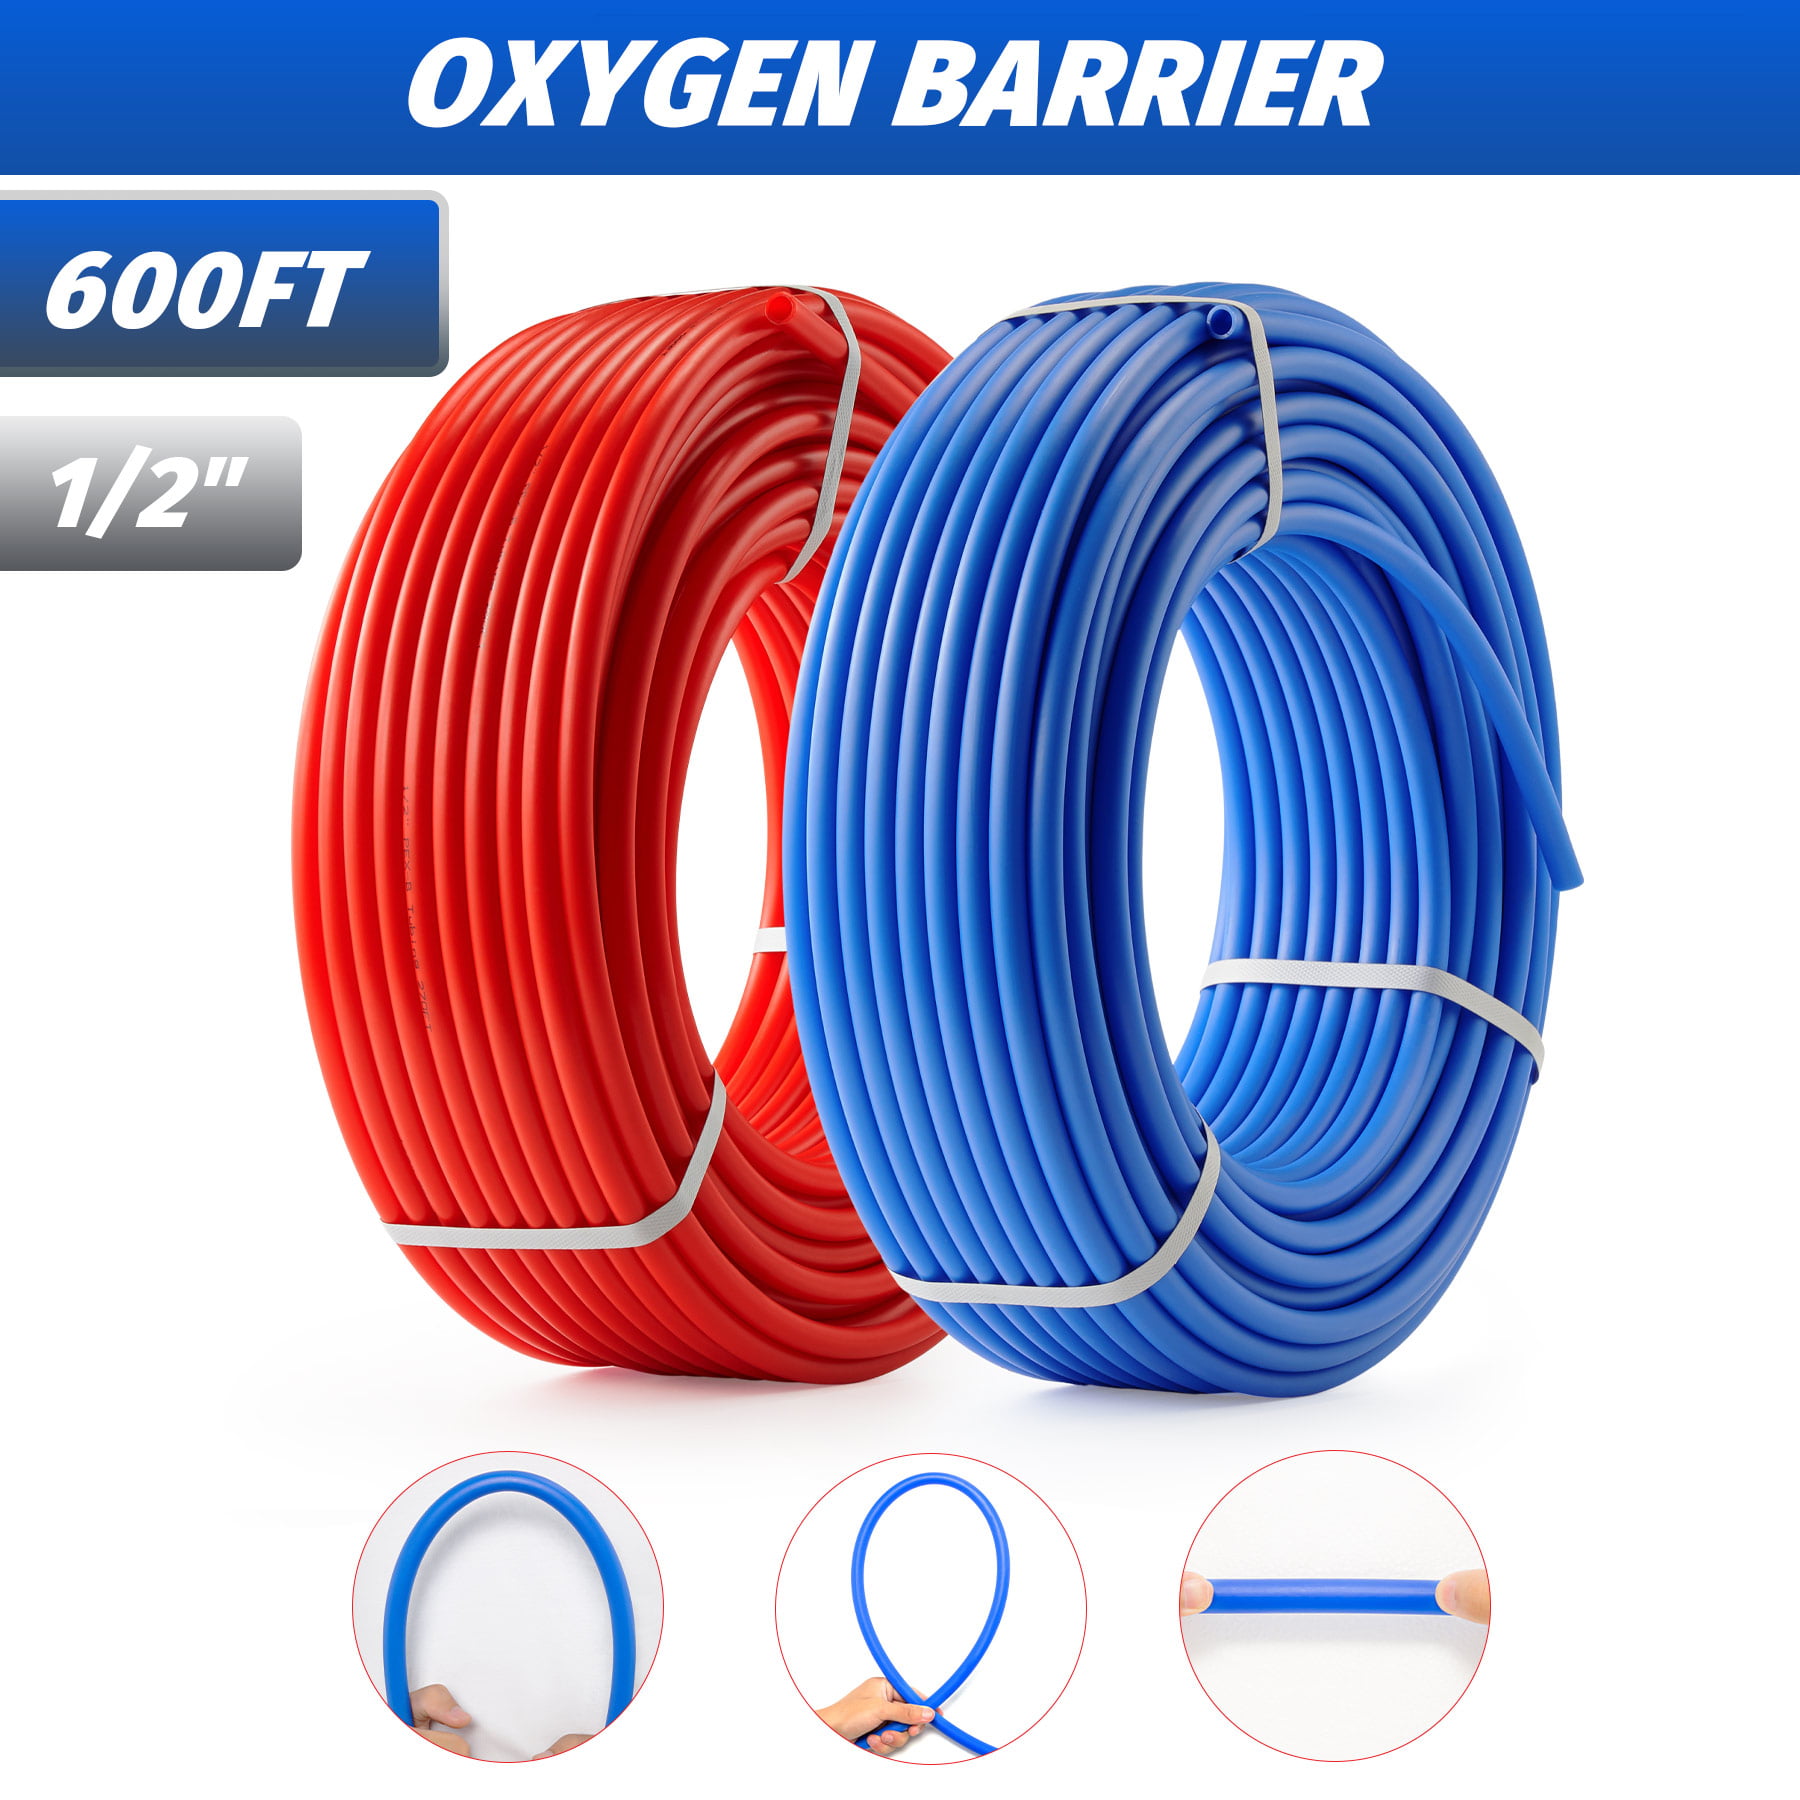 1/2 600 2 Coils 300 Red & 300 Blue Certified Non-Barrier PEX Tubing Htg/Plbg